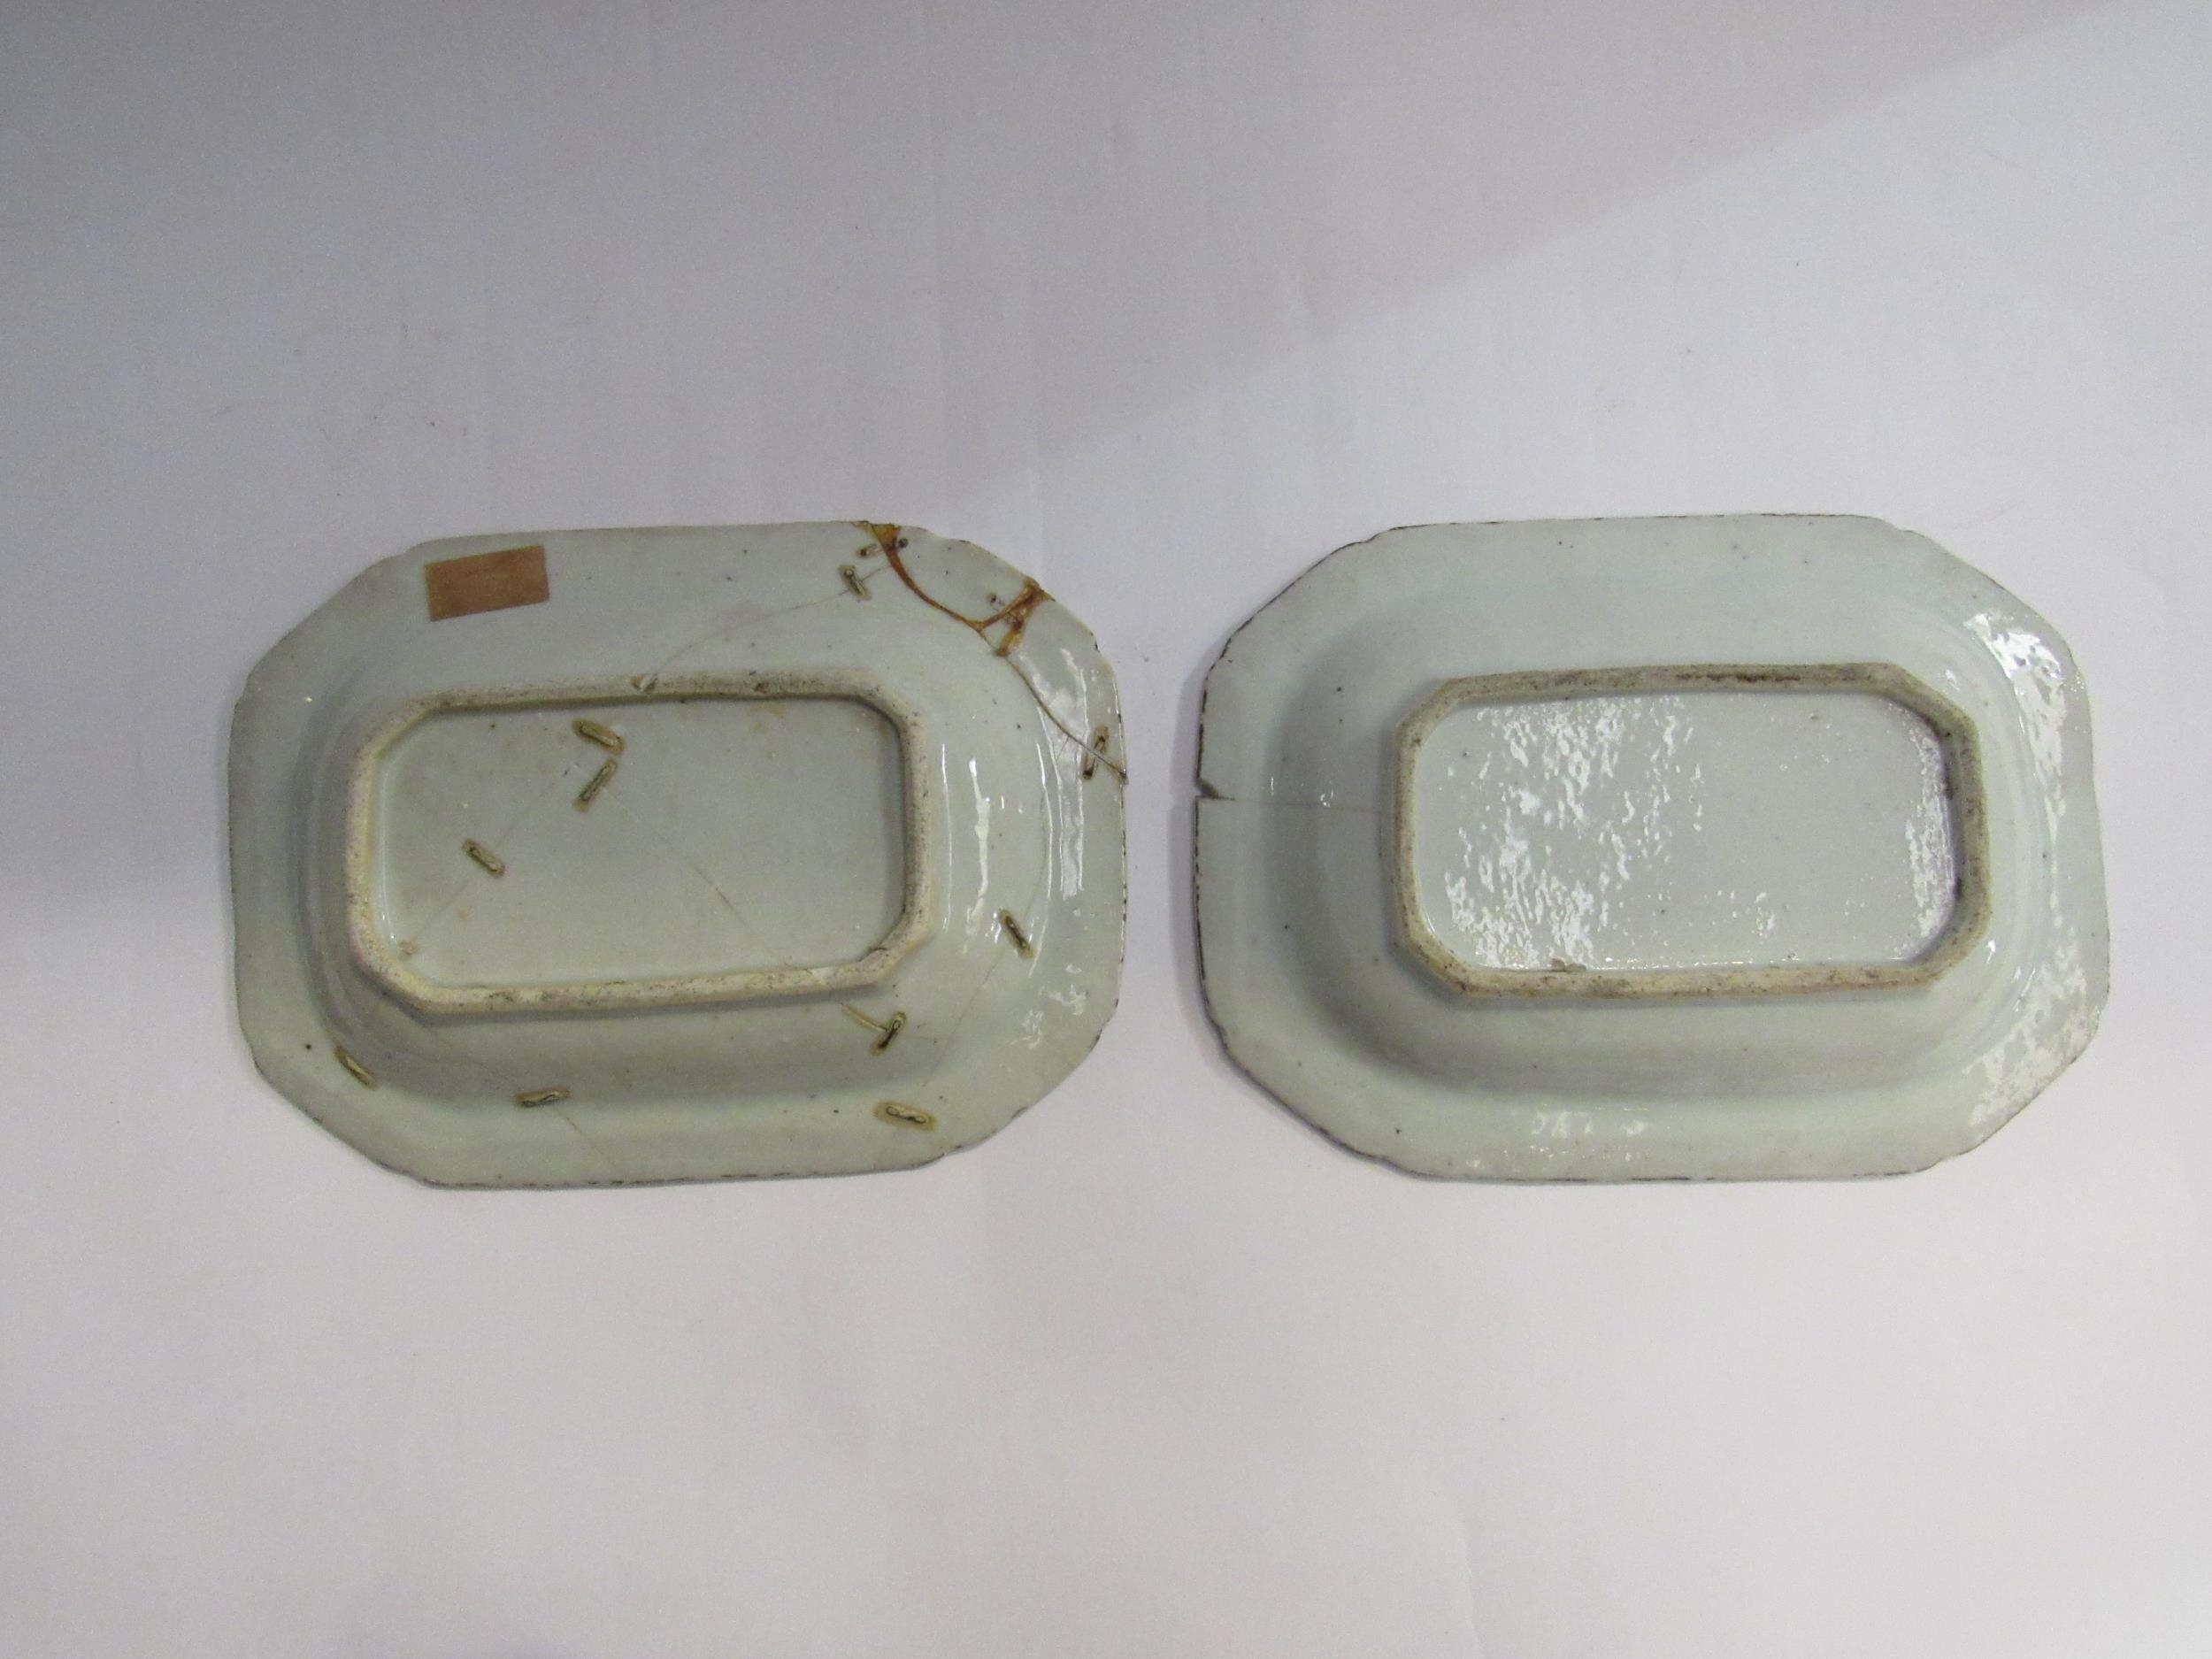 Two Chinese export ware blue and white rectangular plates (2) one a/f, 14cm x 19cm - Image 3 of 3